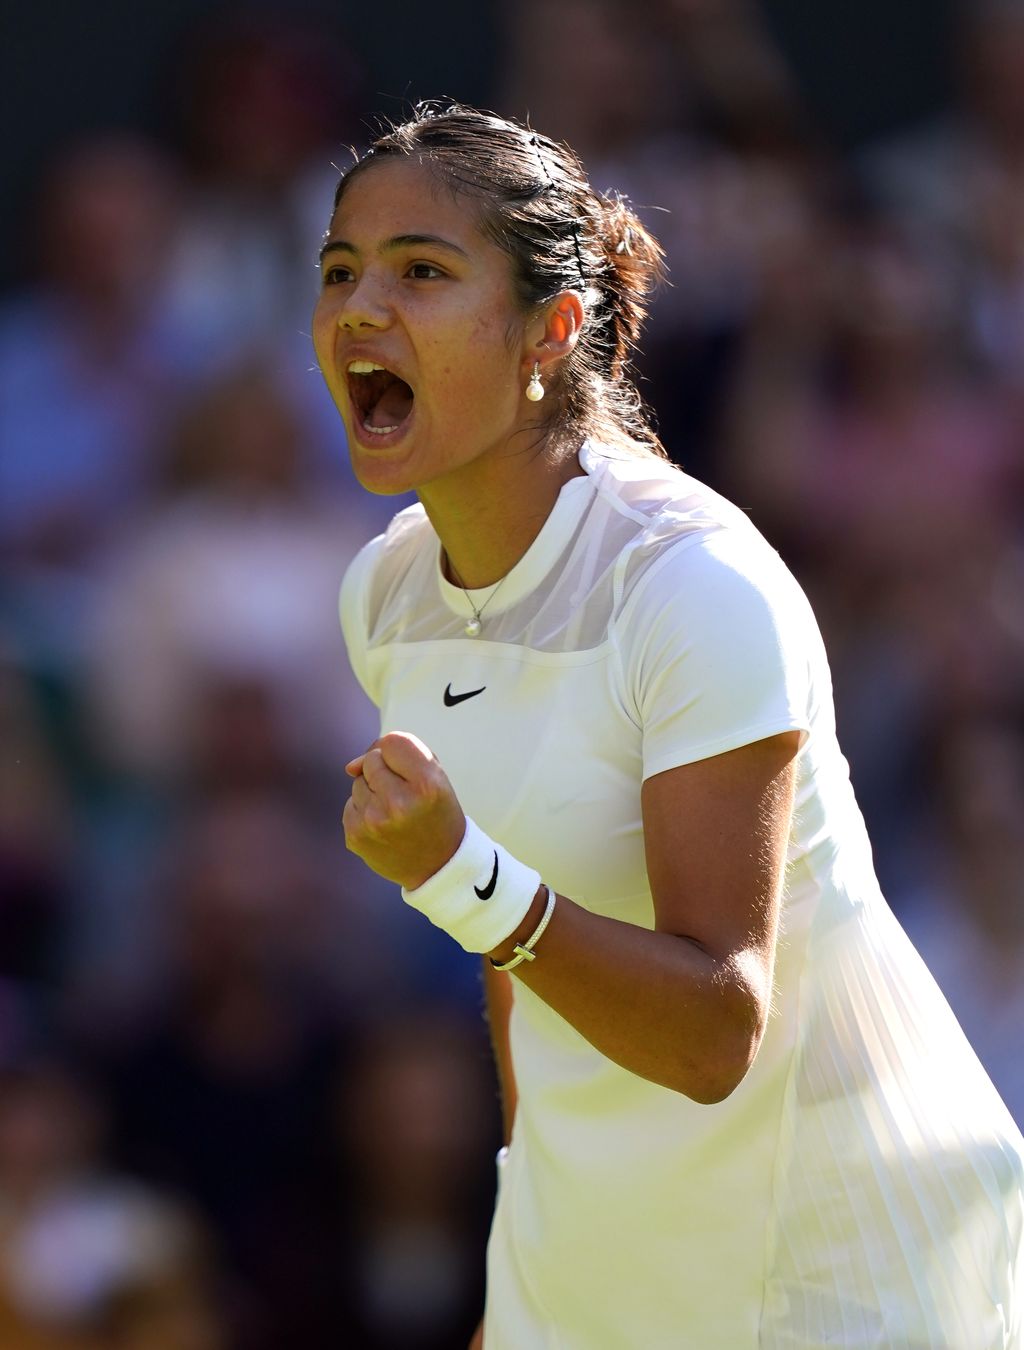 Emma Raducanu celebrates victory over Alison Van Uytvanck on day one of the 2022 Wimbledon Championships at the All England Lawn Tennis and Croquet Club, Wimbledon. Picture date: Monday June 27, 2022. (Photo by Adam Davy/PA Images via Getty Images)